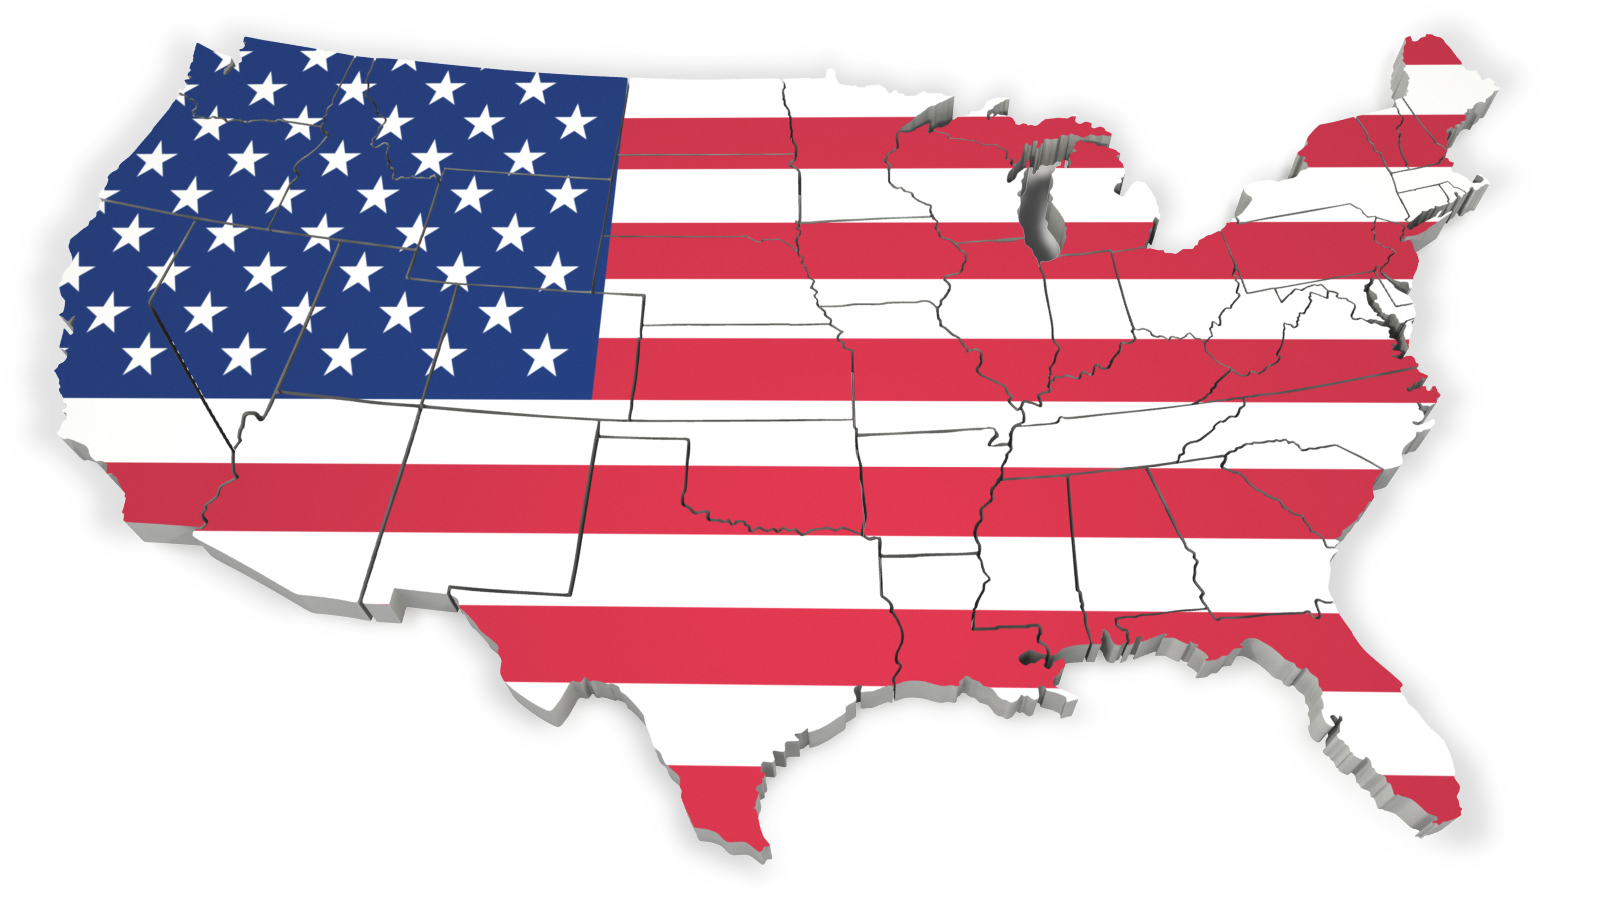 American Flag Graphics - ClipArt Best